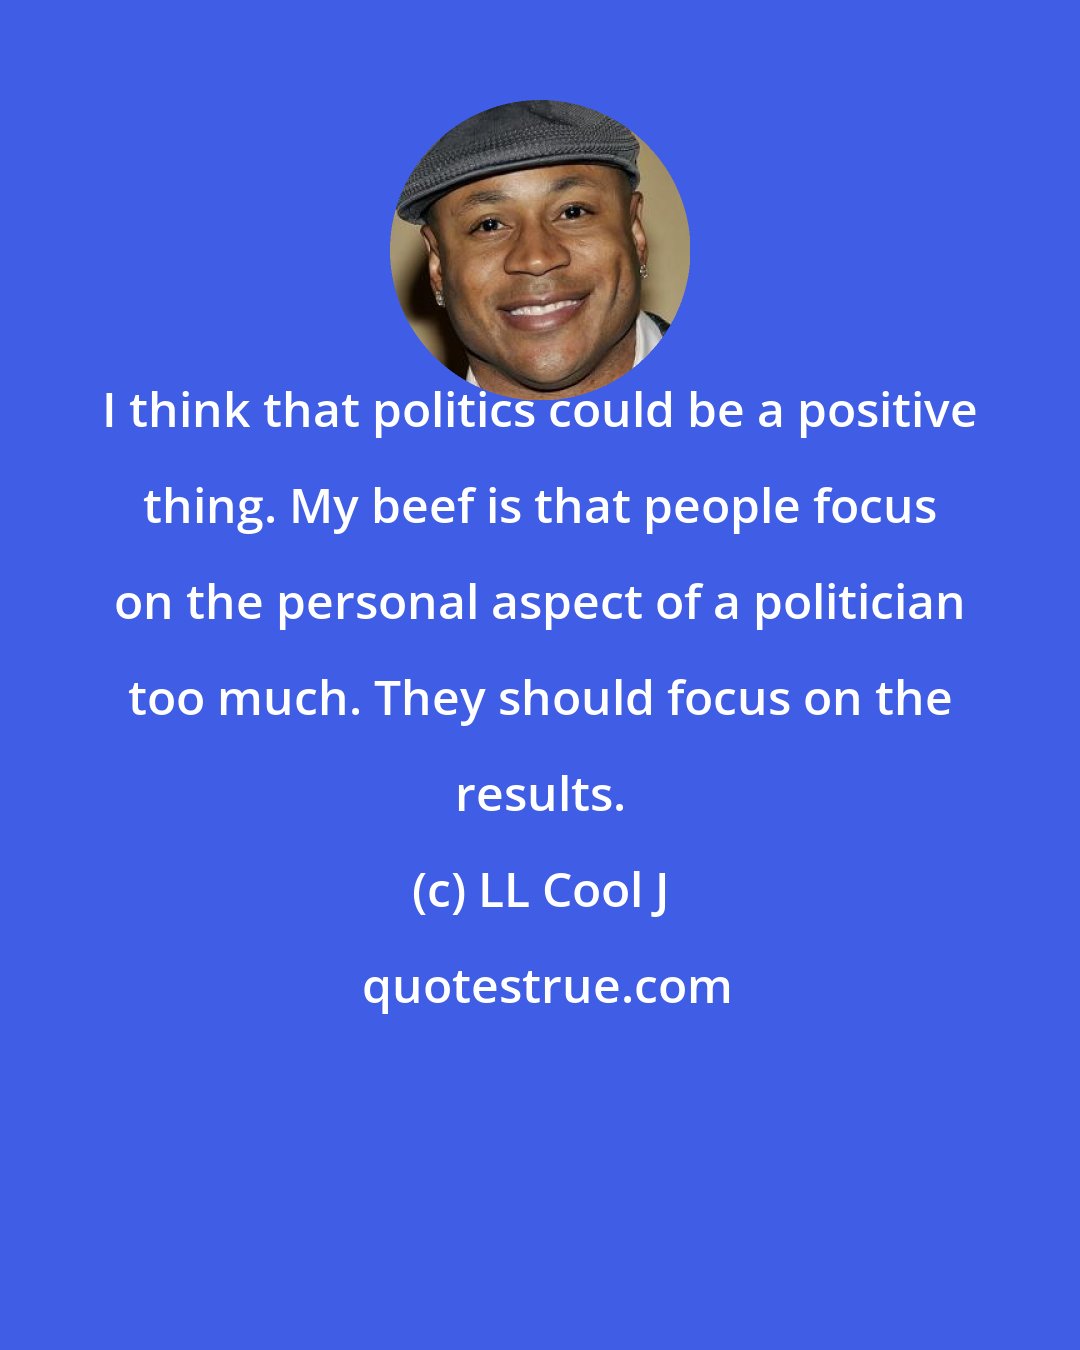 LL Cool J: I think that politics could be a positive thing. My beef is that people focus on the personal aspect of a politician too much. They should focus on the results.